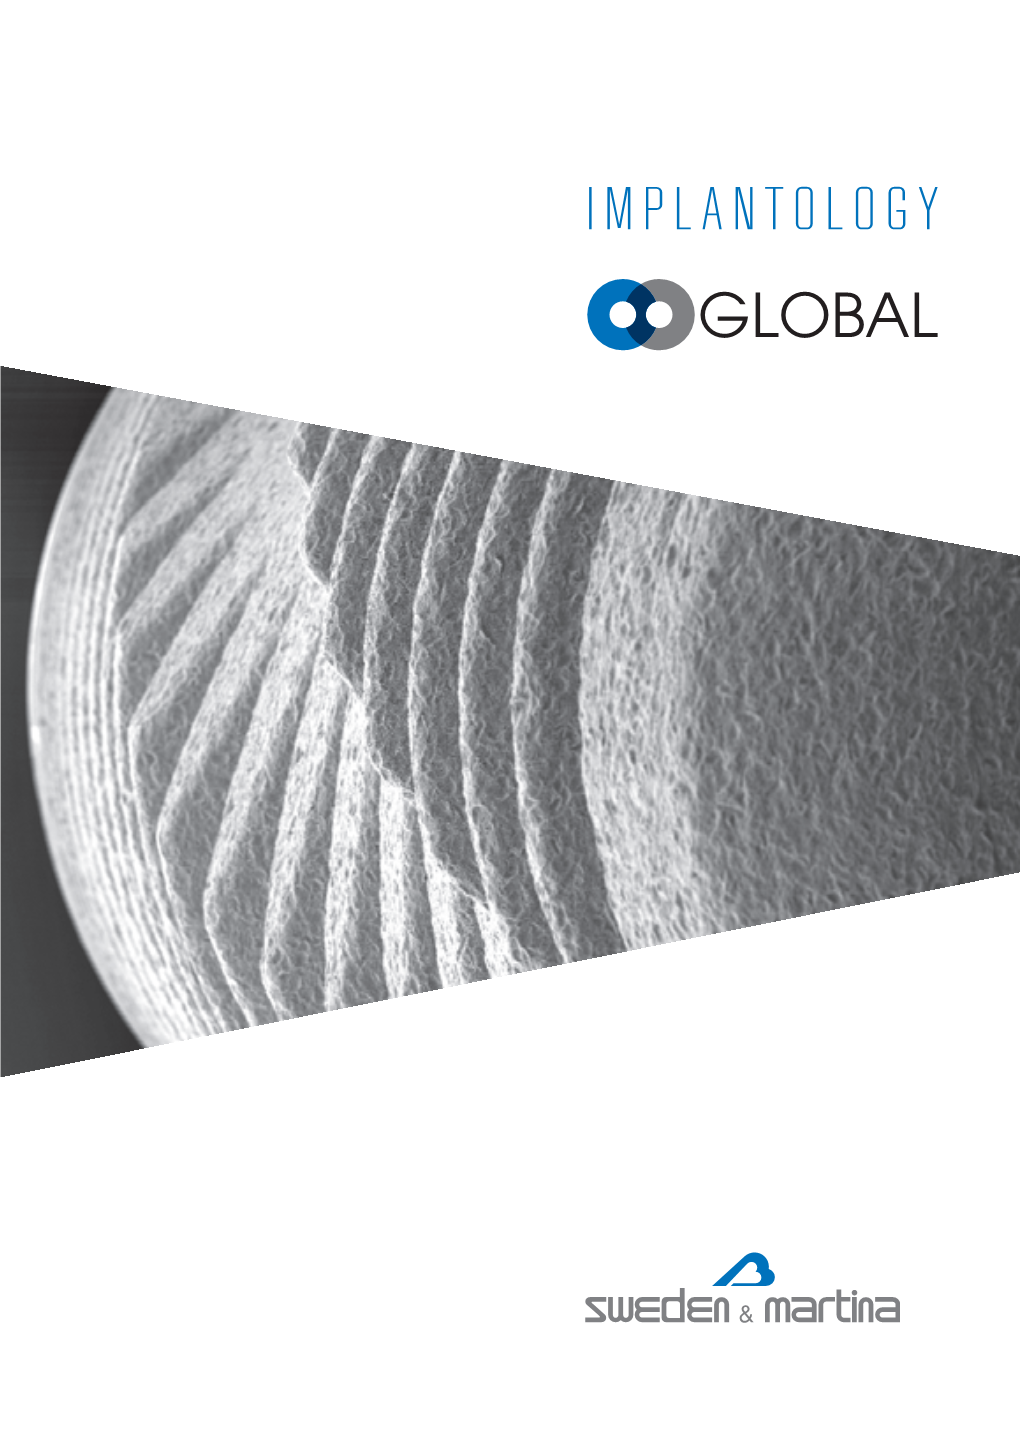 Implantology Global Implantology Table of Contents